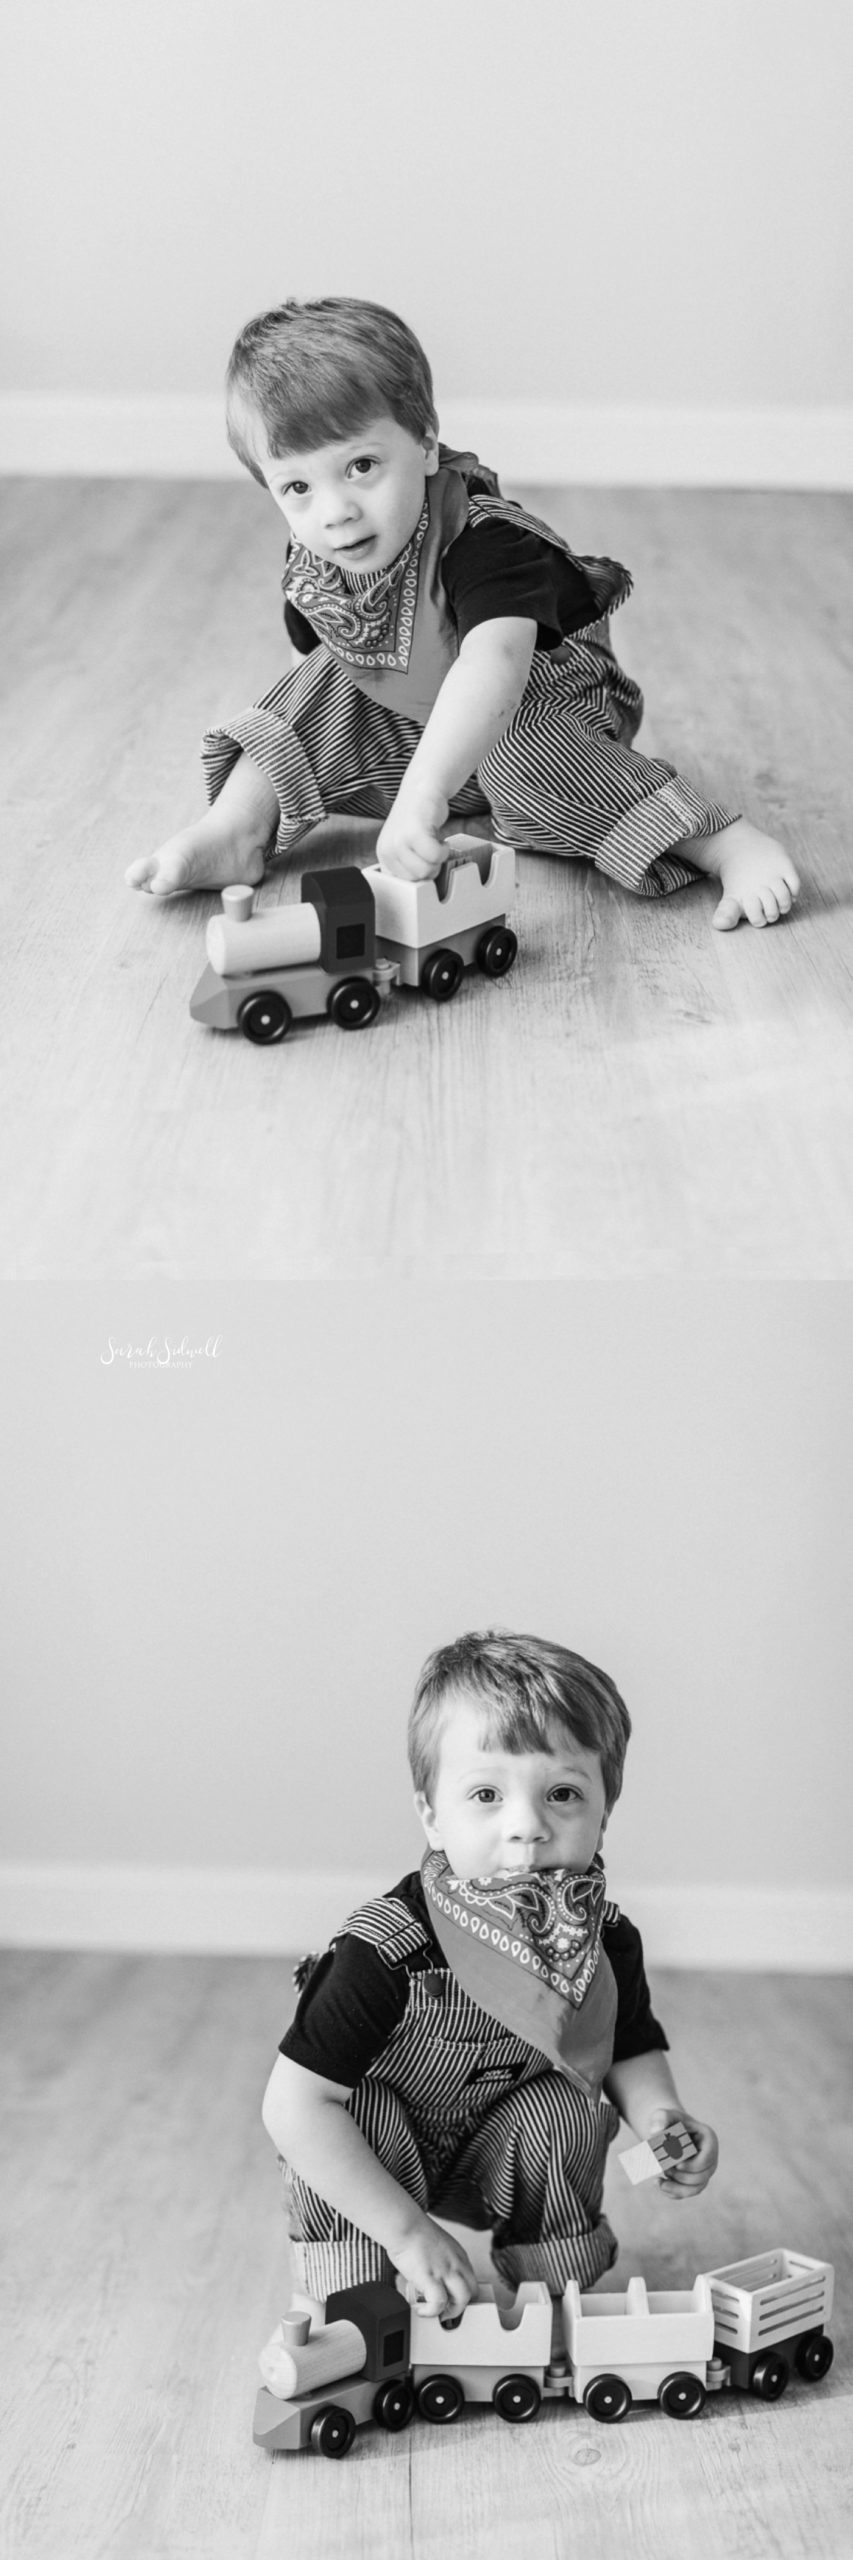 A boy plays with his trains. 